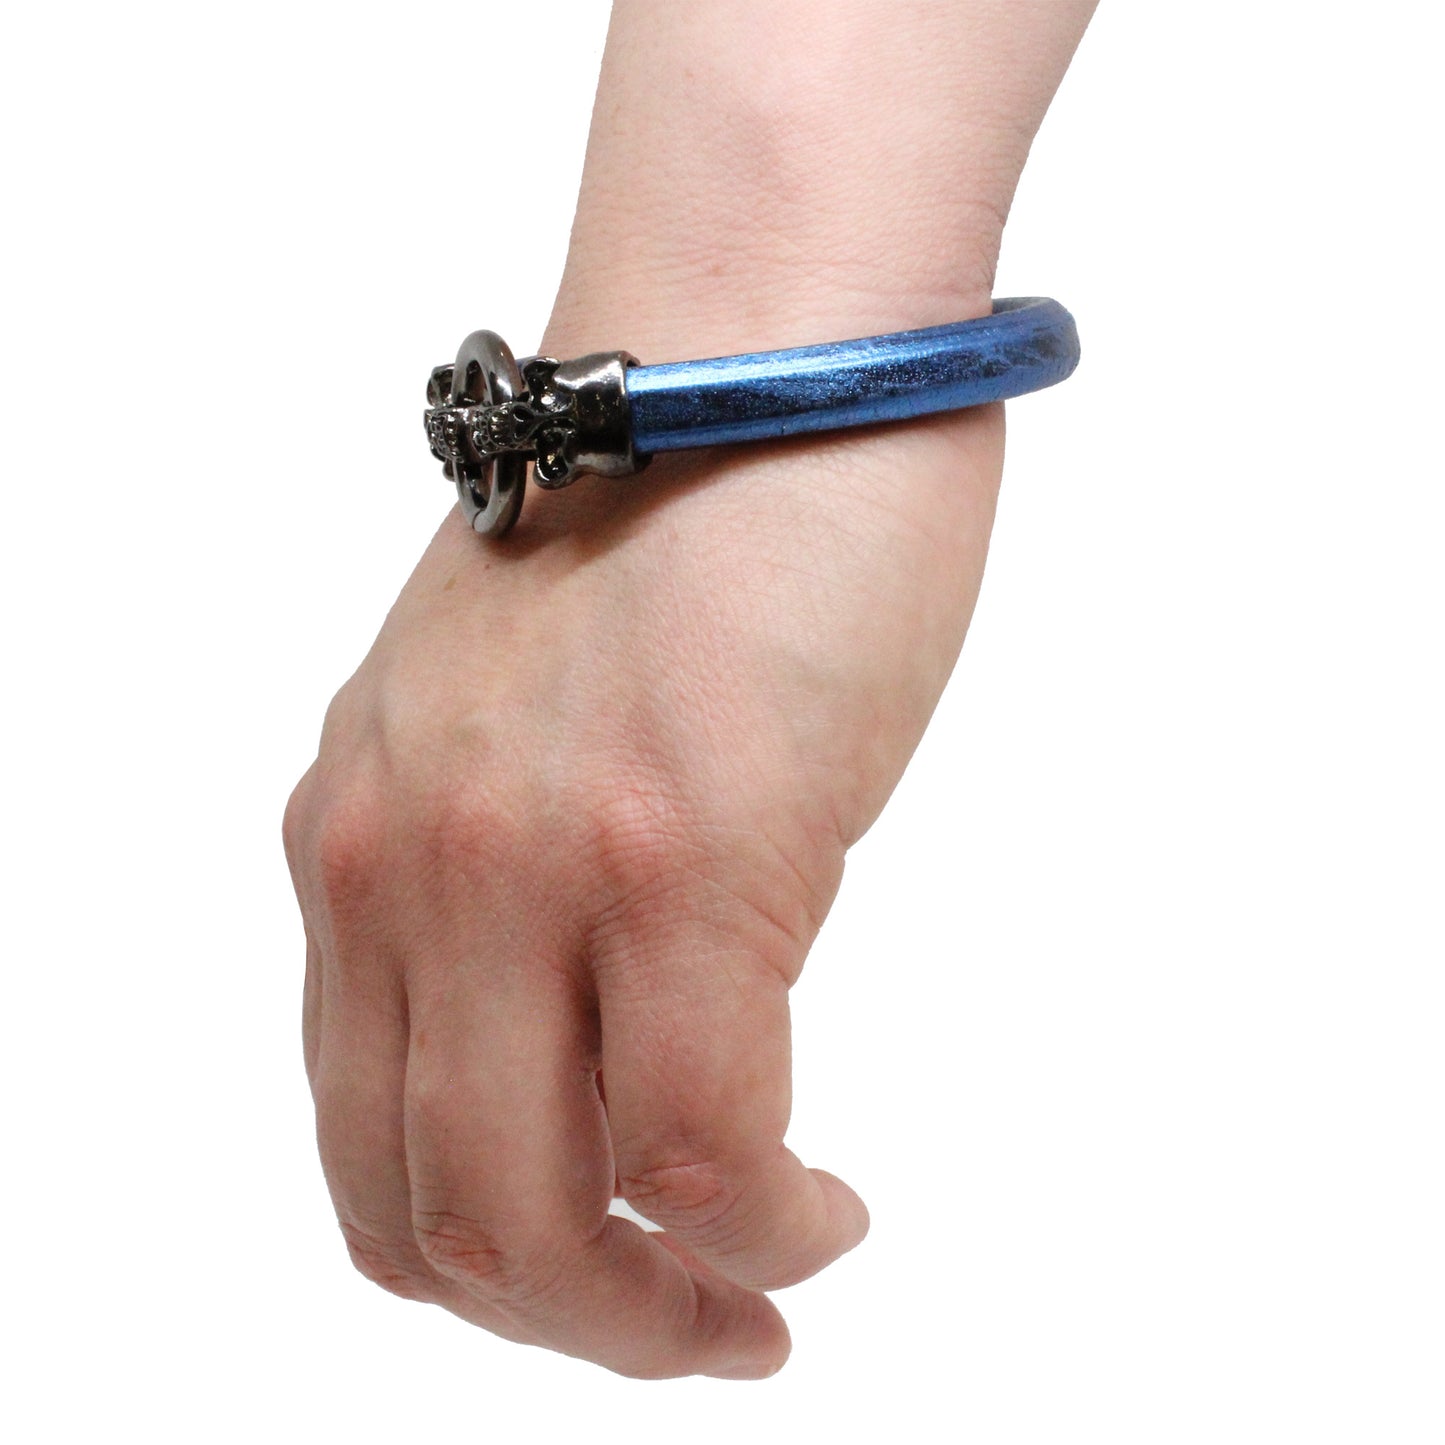 Skull and Ring Bracelet / 7.5 Inch wrist size / large black double skull clasp / blue leather cord